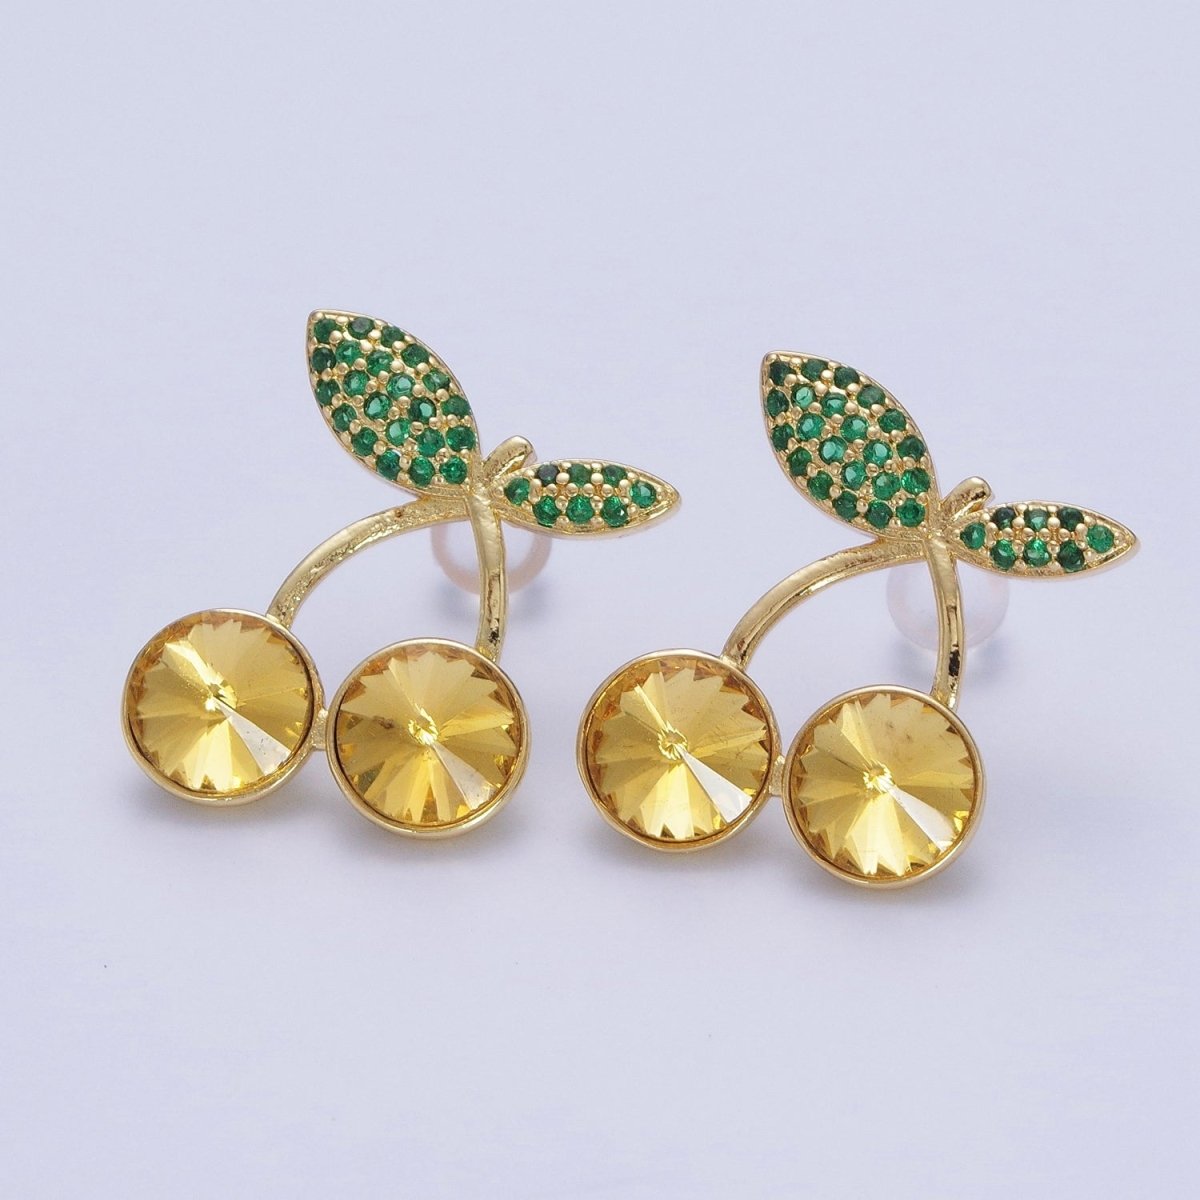 24K Gold Filled Micro Paved Cubic Zirconia Cherry Fruit Stud Earrings P-411~P-417 - DLUXCA